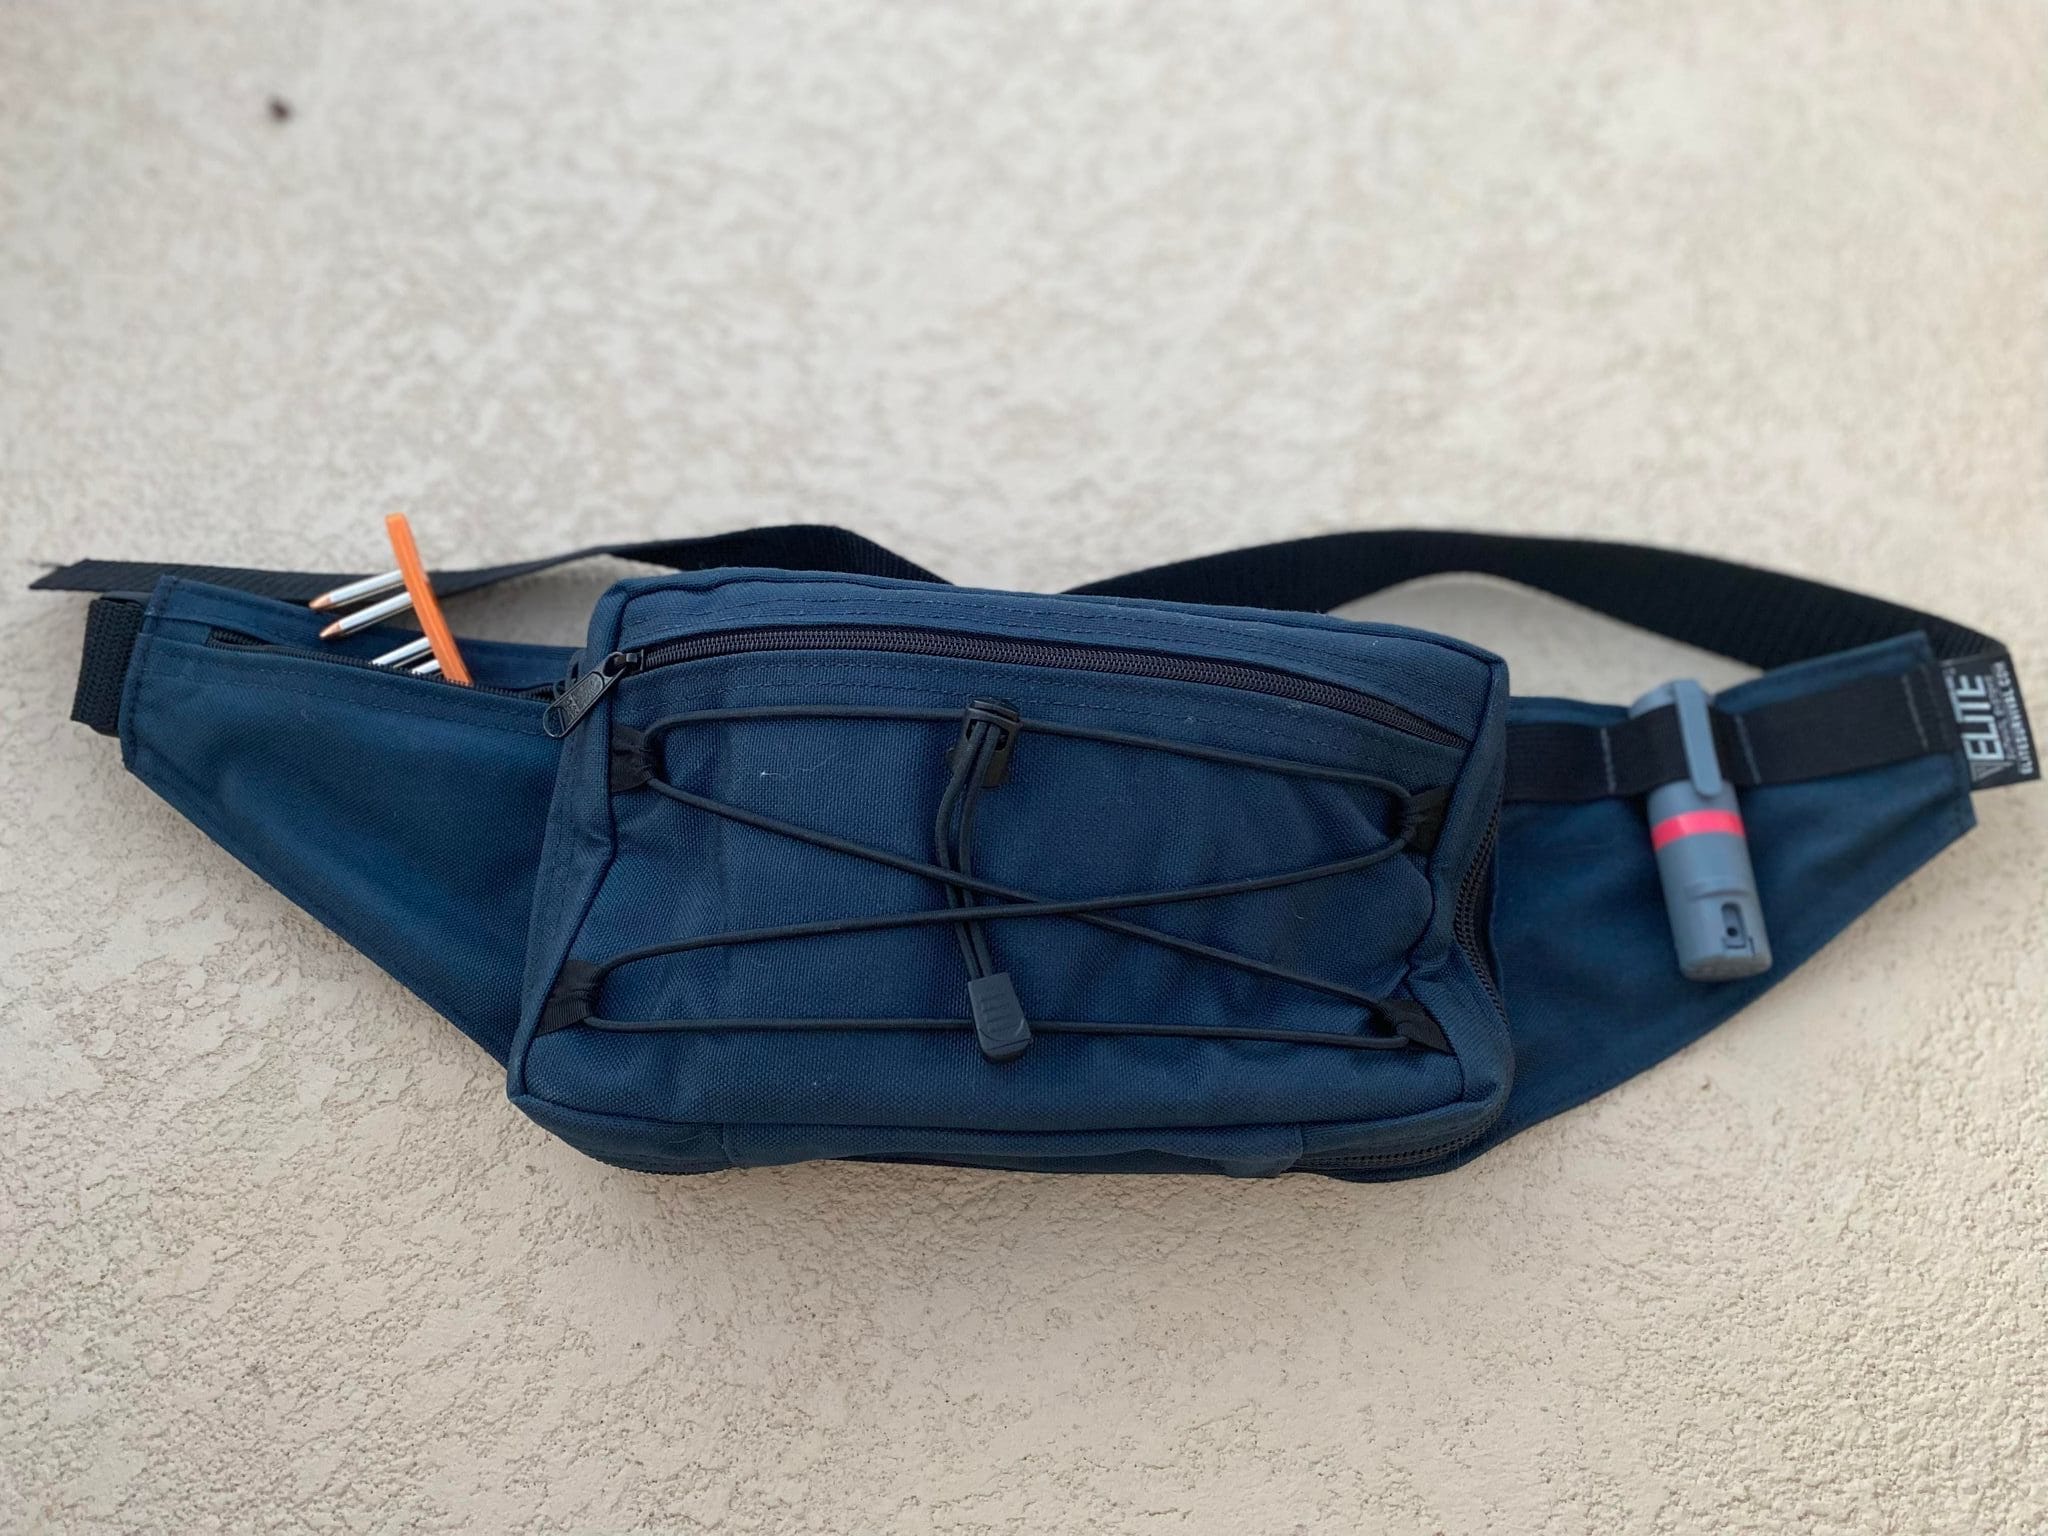 Elite Survival Systems Tailgunner 2 Fanny Pack Review - AmmoLand ...